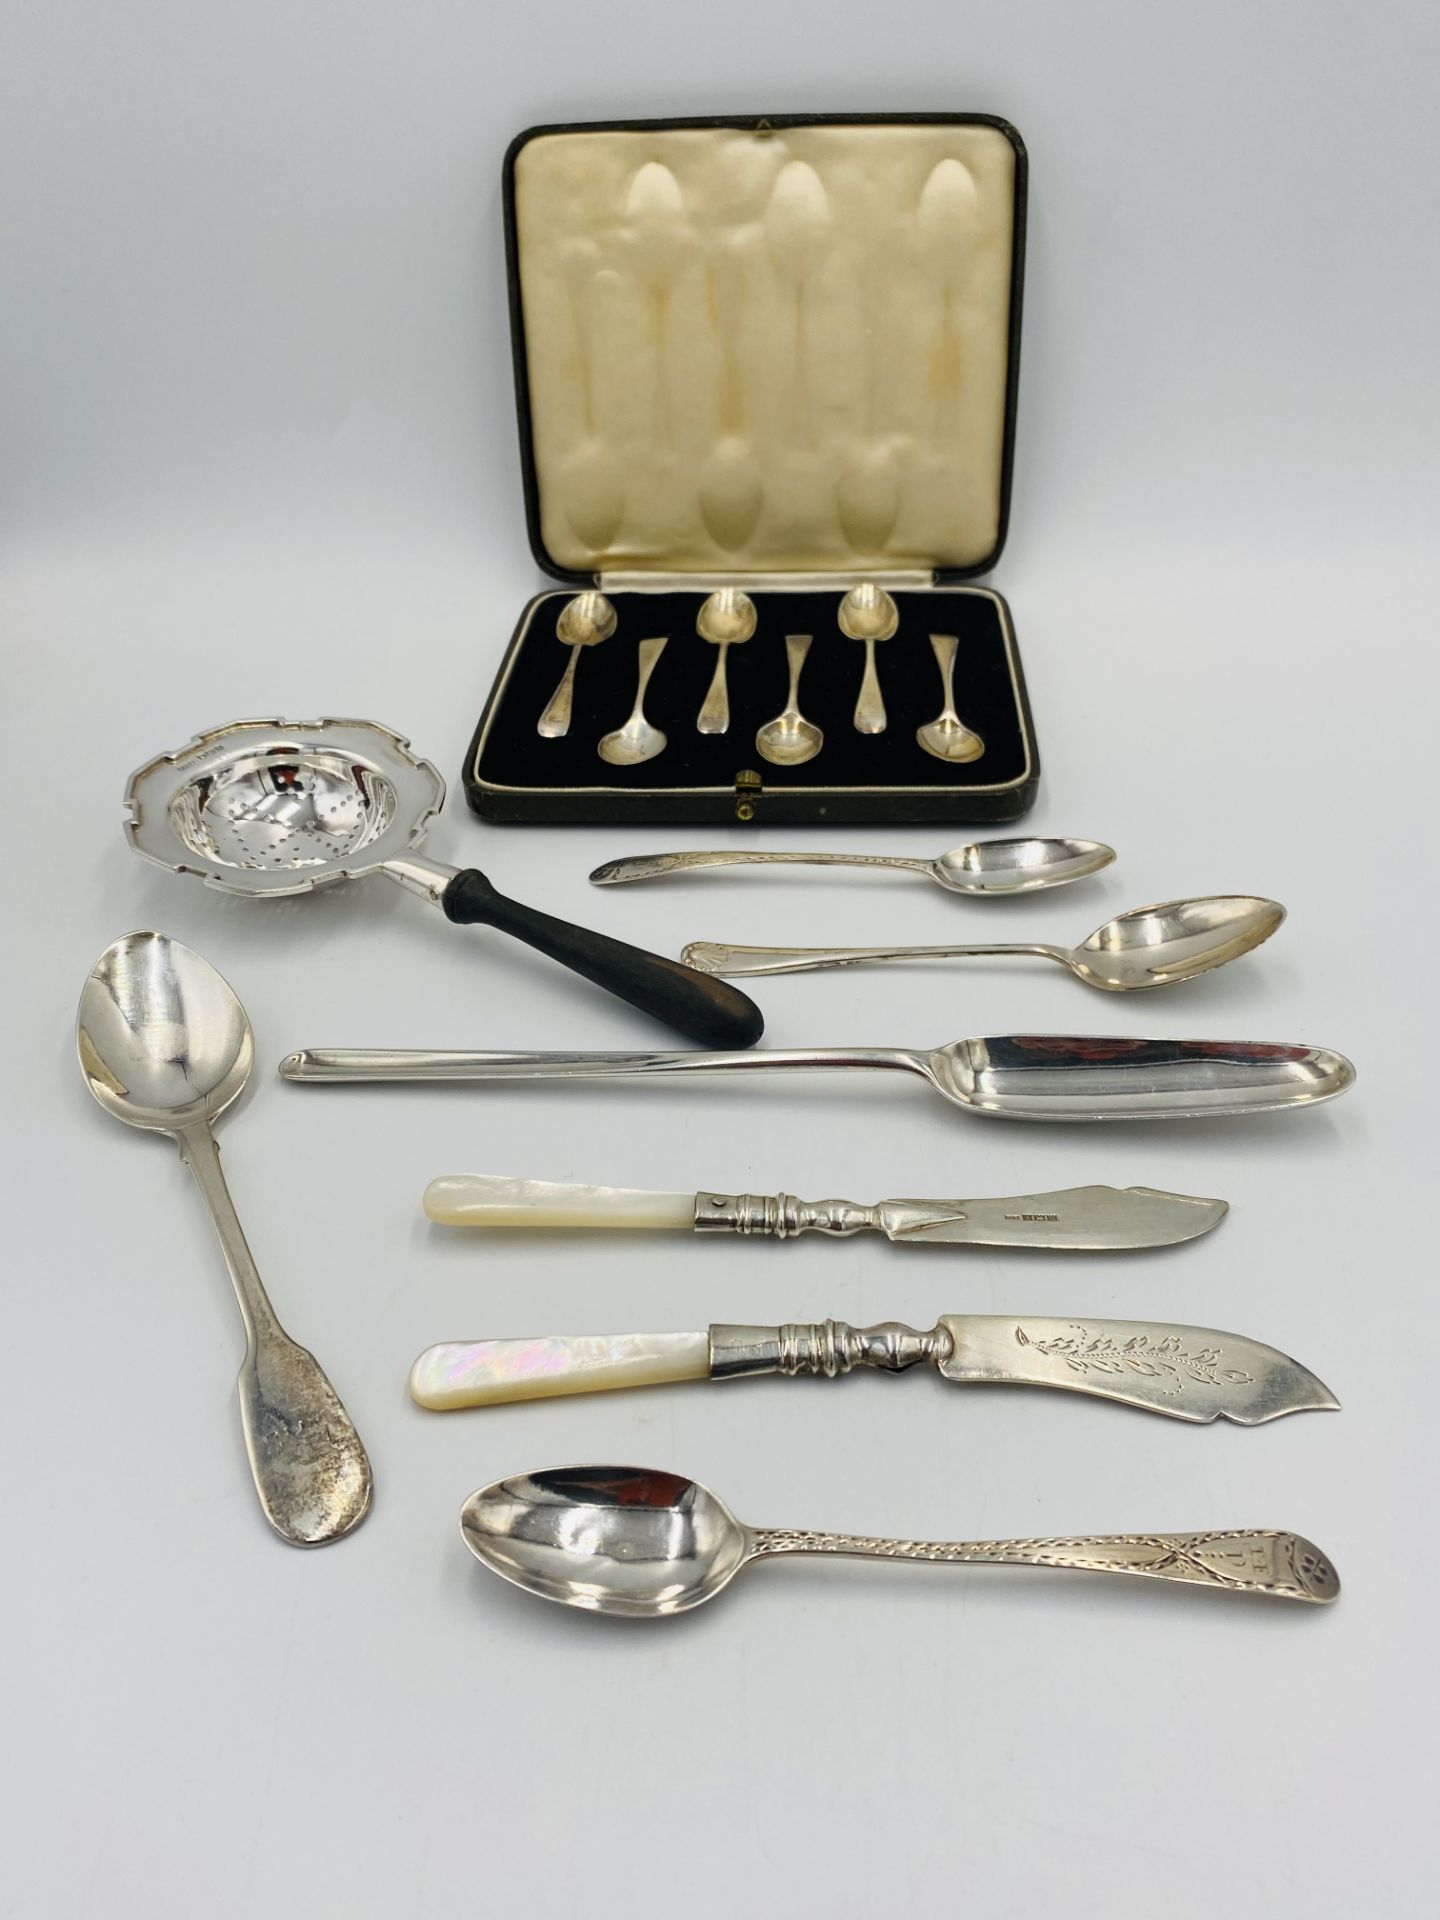 Boxed set of silver spoons and other silver flatware - Image 3 of 5